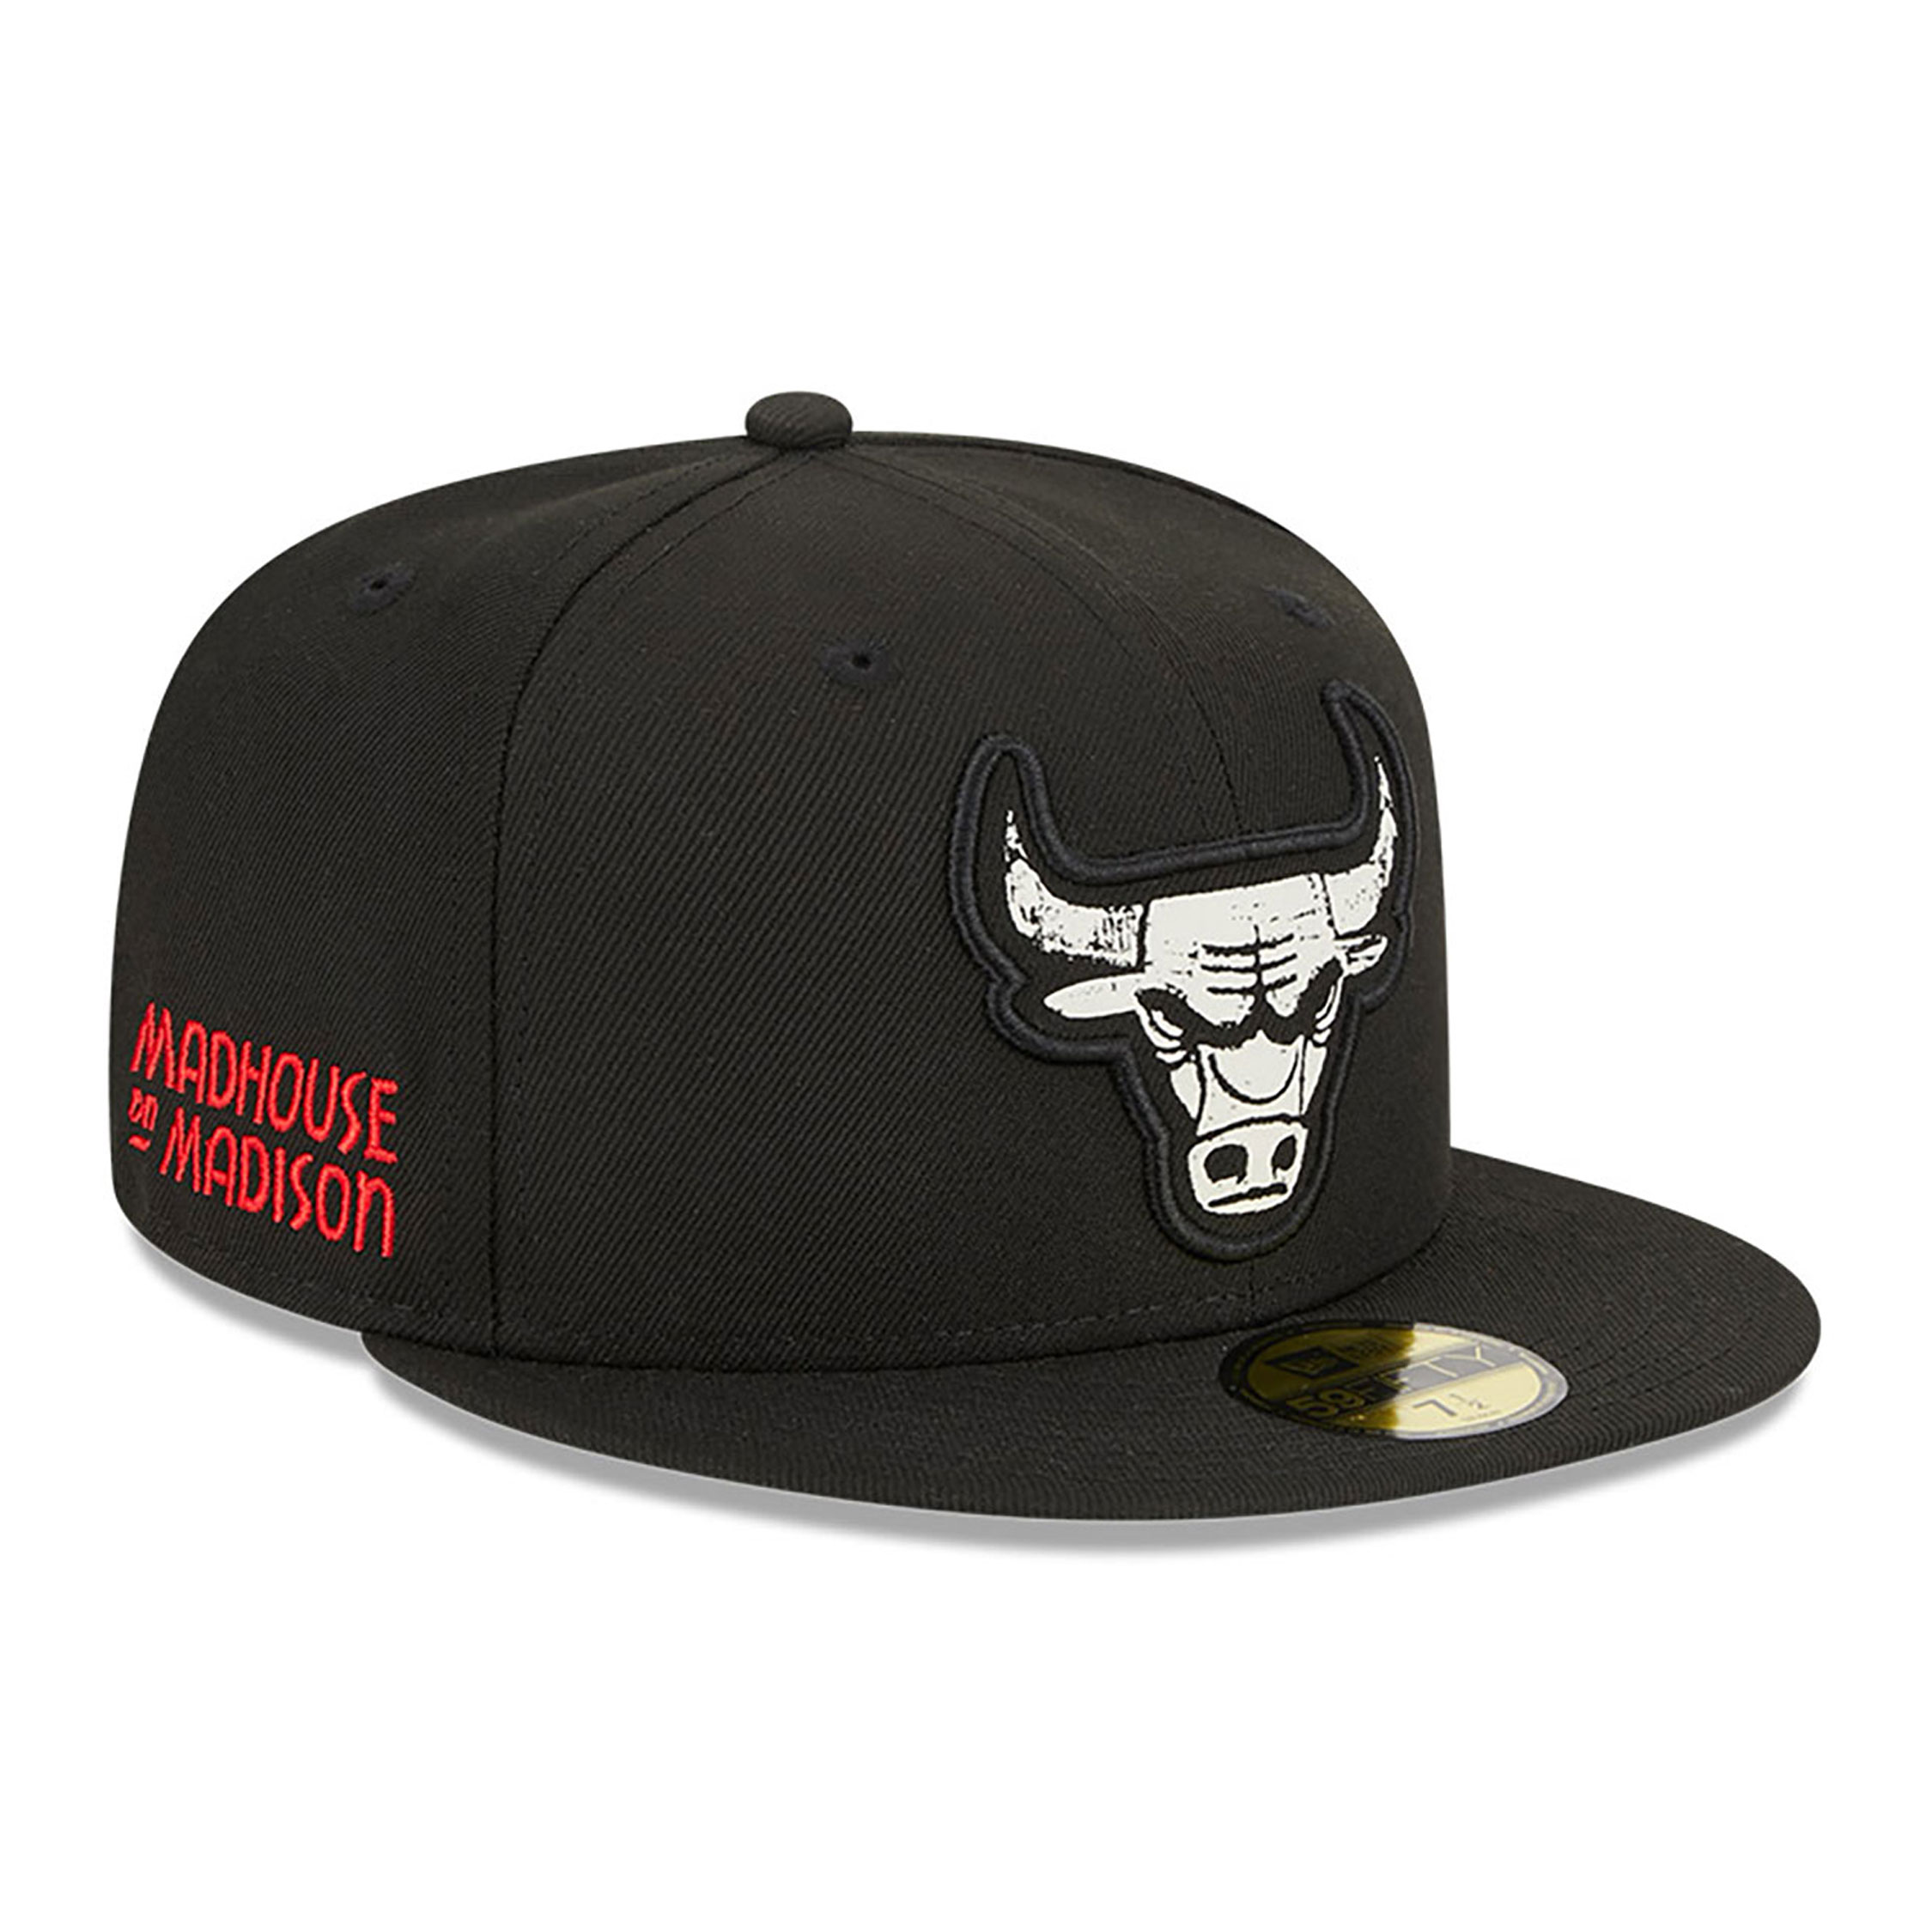 Chicago Bulls NBA City Edition Black 59FIFTY Fitted Cap